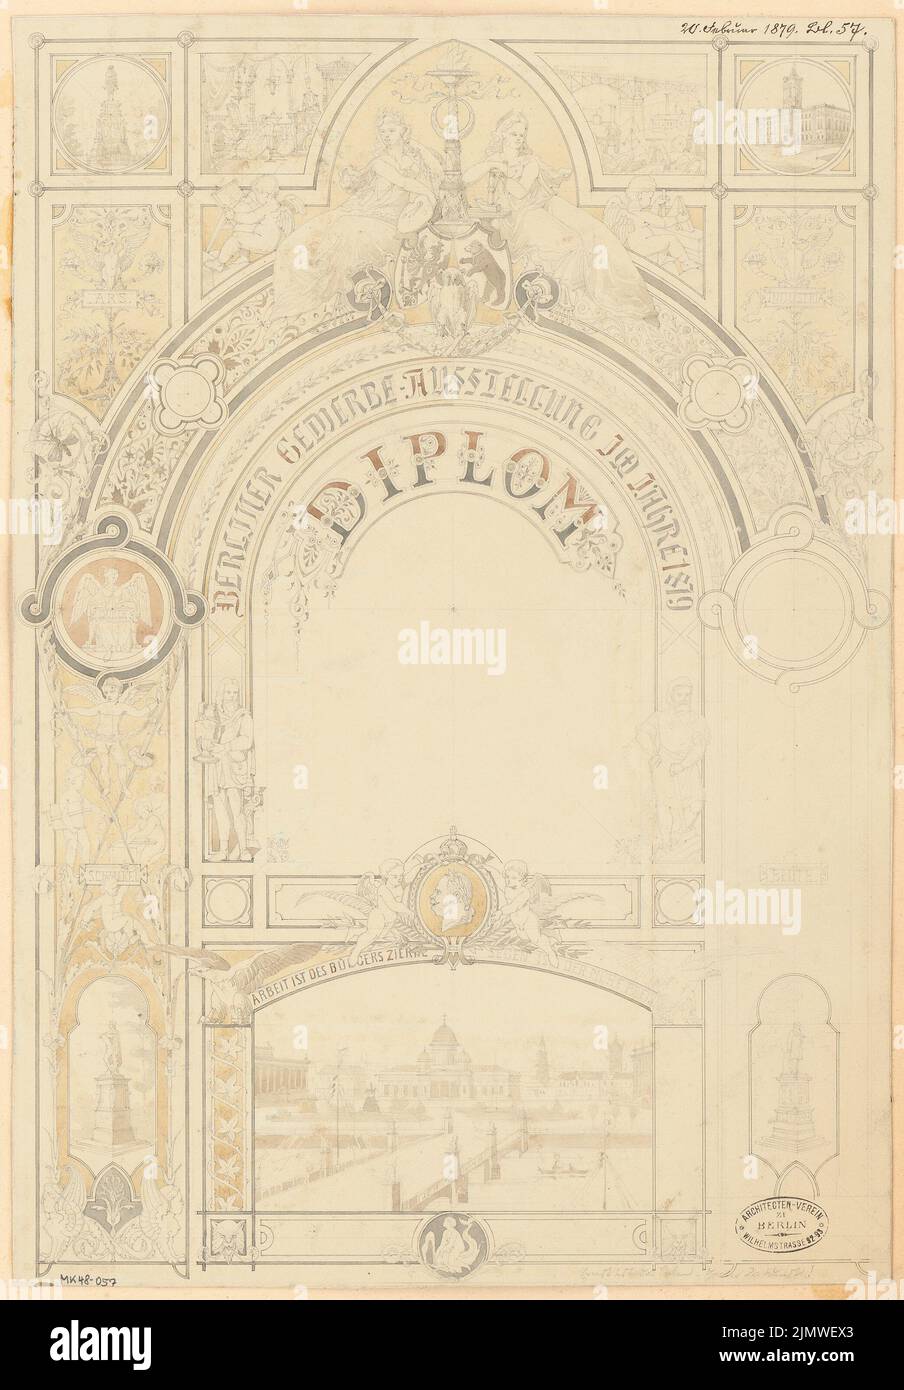 Unknown architect, diploma for the Berlin trade exhibition 1879. Monthly competition February 1879 (02.1879): View. Pencil watercolor on the box, 53.5 x 37.2 cm (including scan edges) N.N. : Diplom für die Berliner Gewerbeausstellung 1879. Monatskonkurrenz Februar 1879 Stock Photo